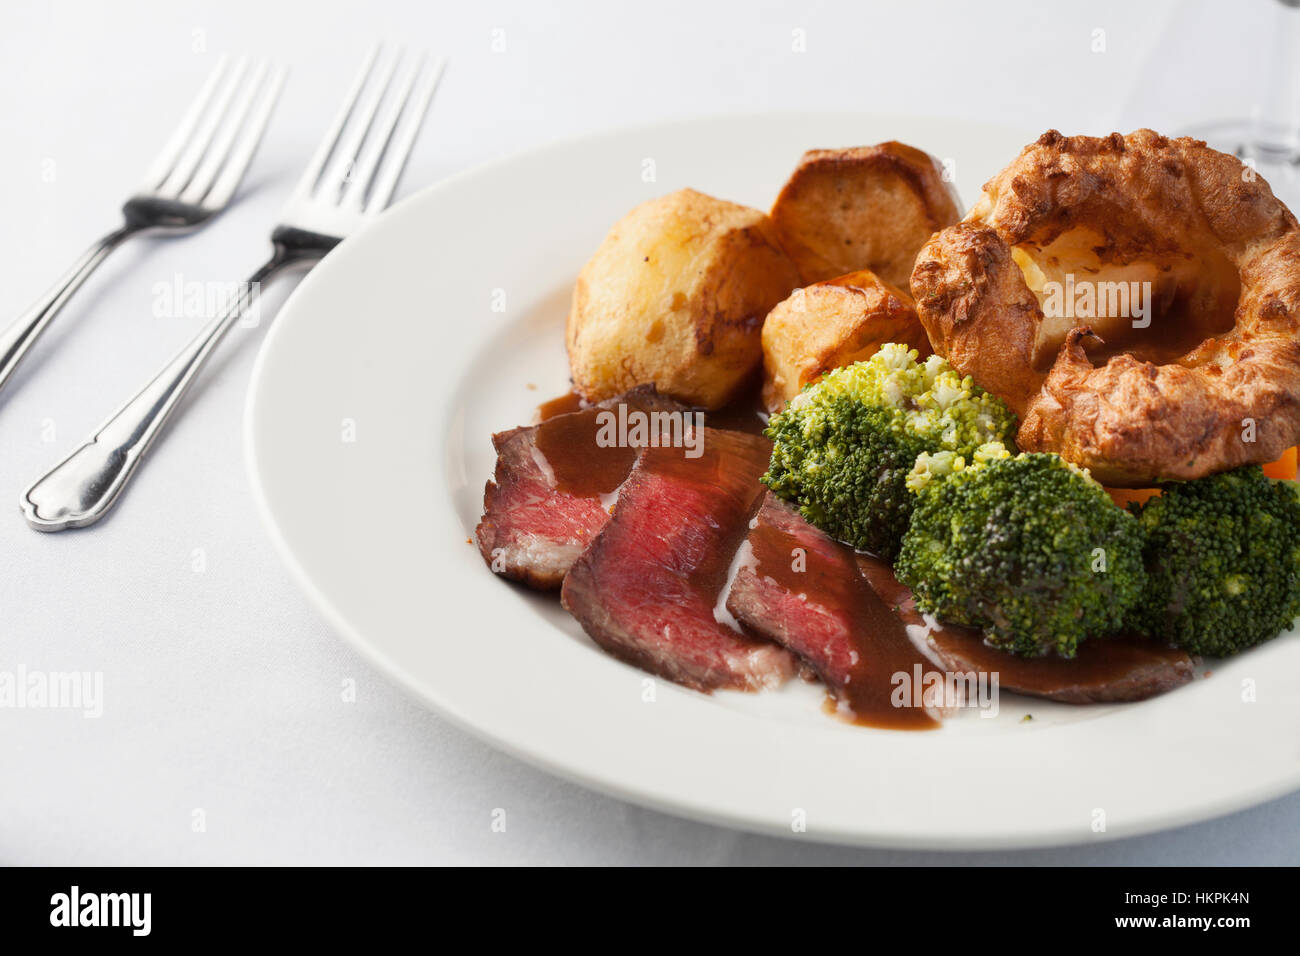 Traditional British roast dinner of rare beef, yorkshire pudding, roast potatoes and brocolli with gravy. Stock Photo